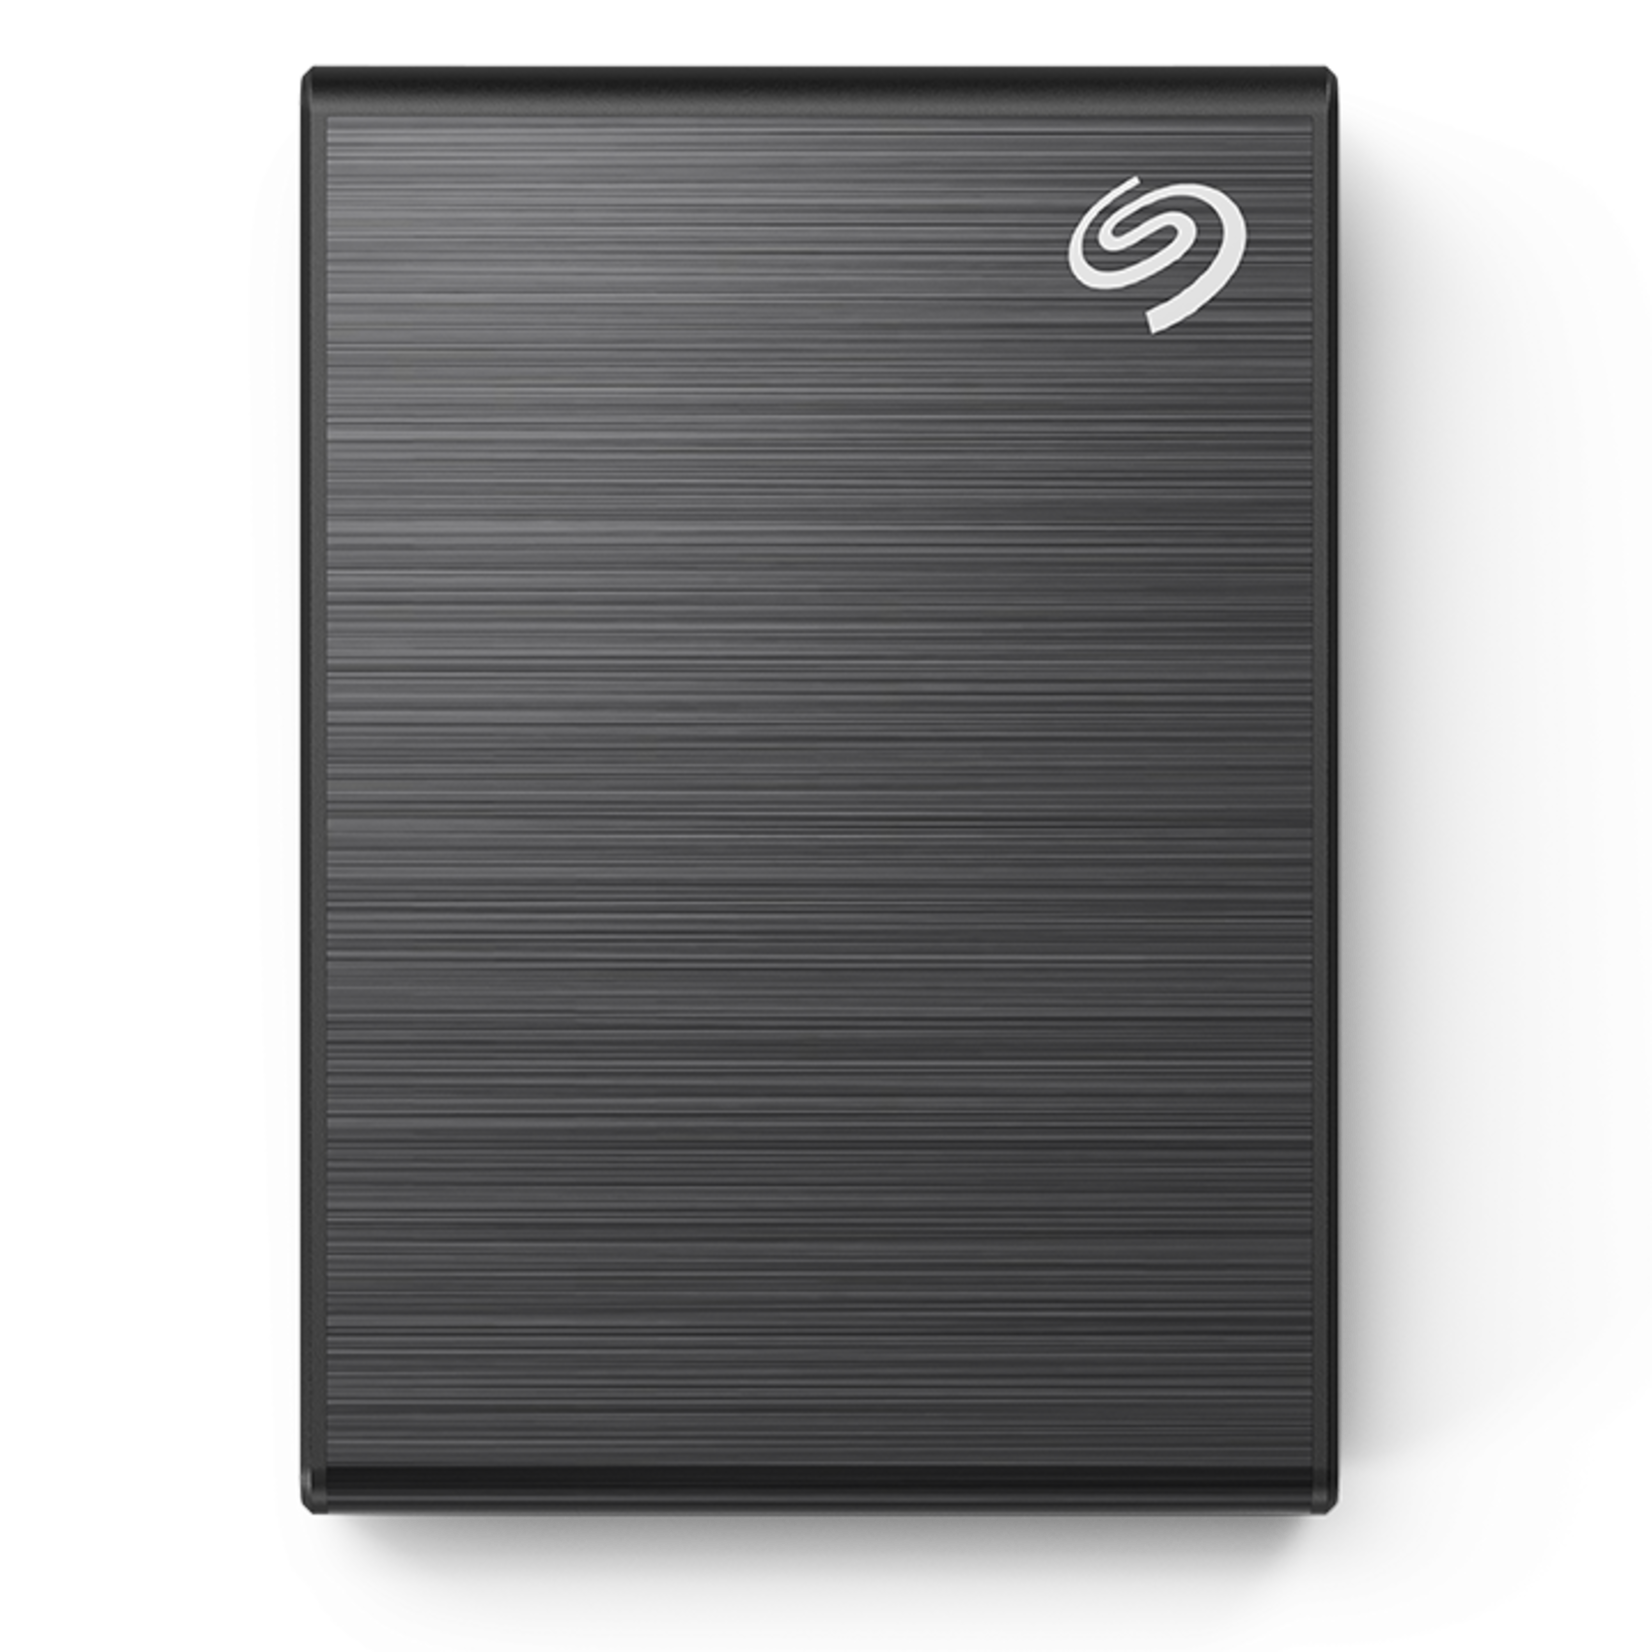 Seagate Seagate One Touch 1TB External Hard Drive